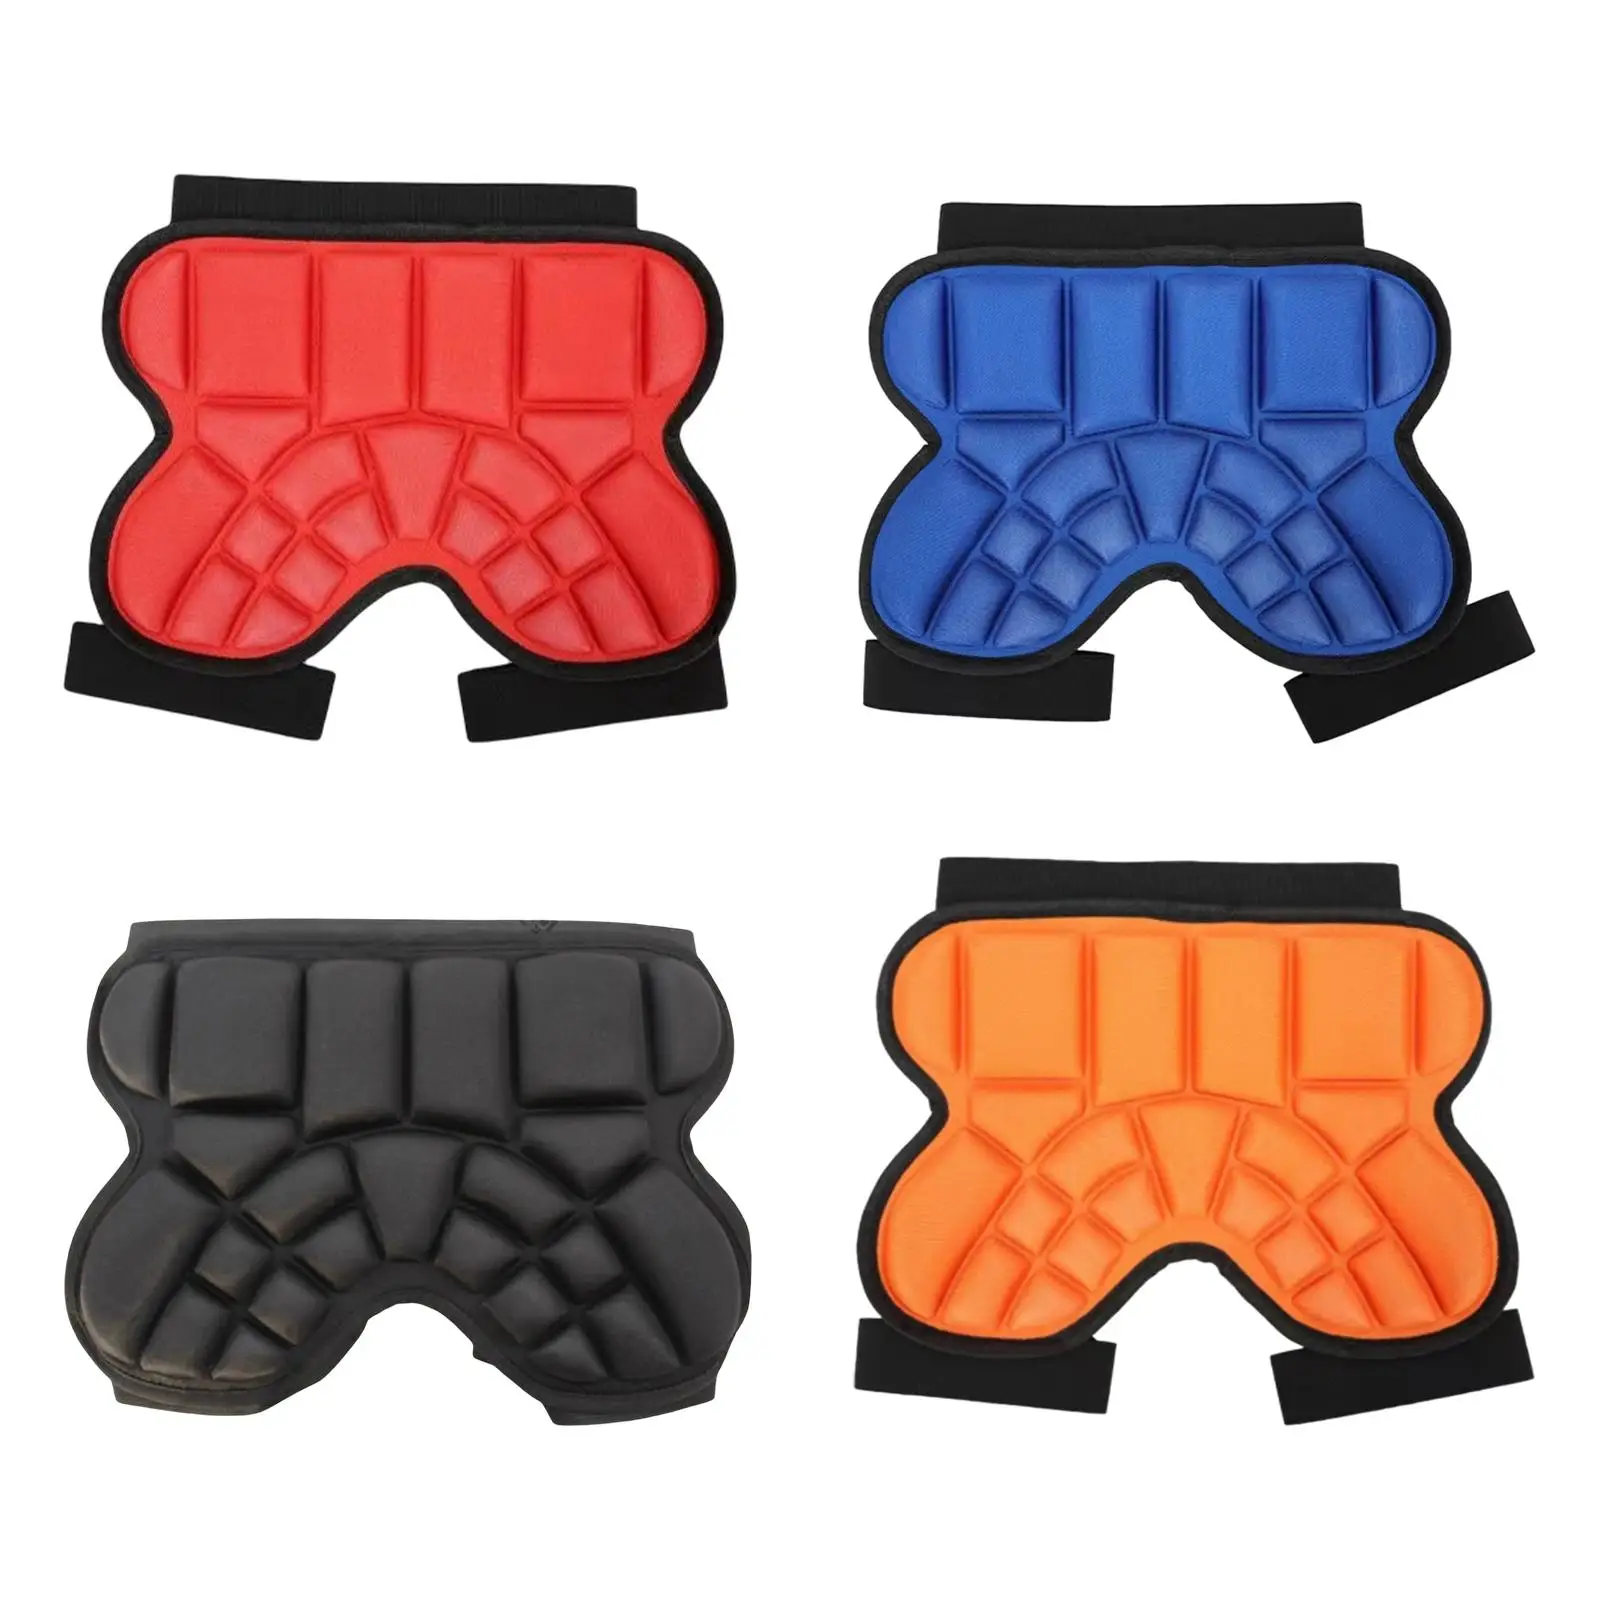 Hip Guard Pad Mat Supporter Guard Pad Padded Hip Protection for Skiing Winter Sports BMX Skateboarding Snowboarding